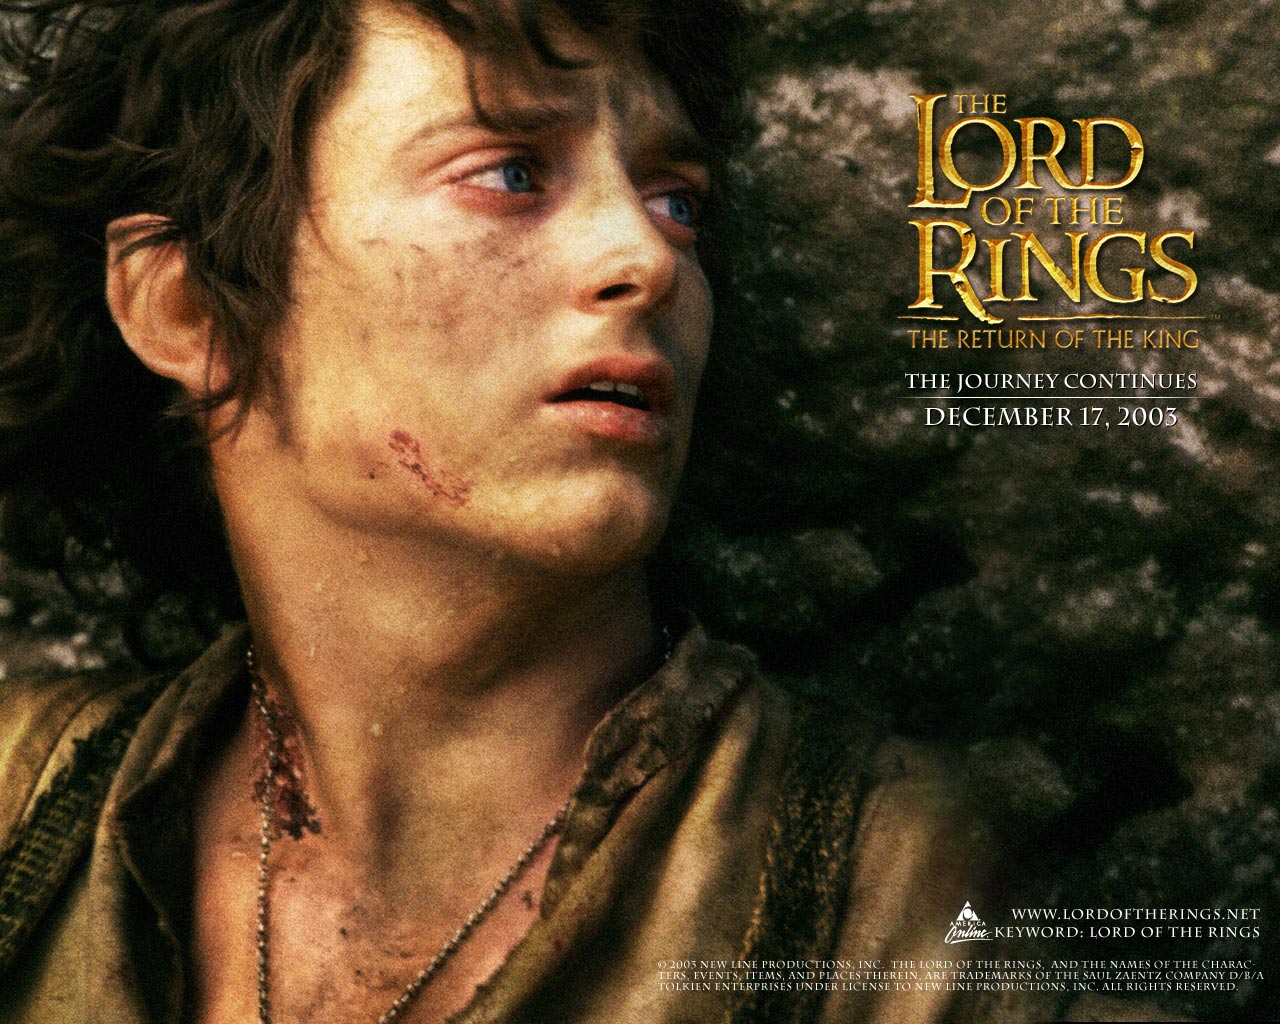 Download full size Lord Of The Rings wallpaper / Movies / 1280x1024